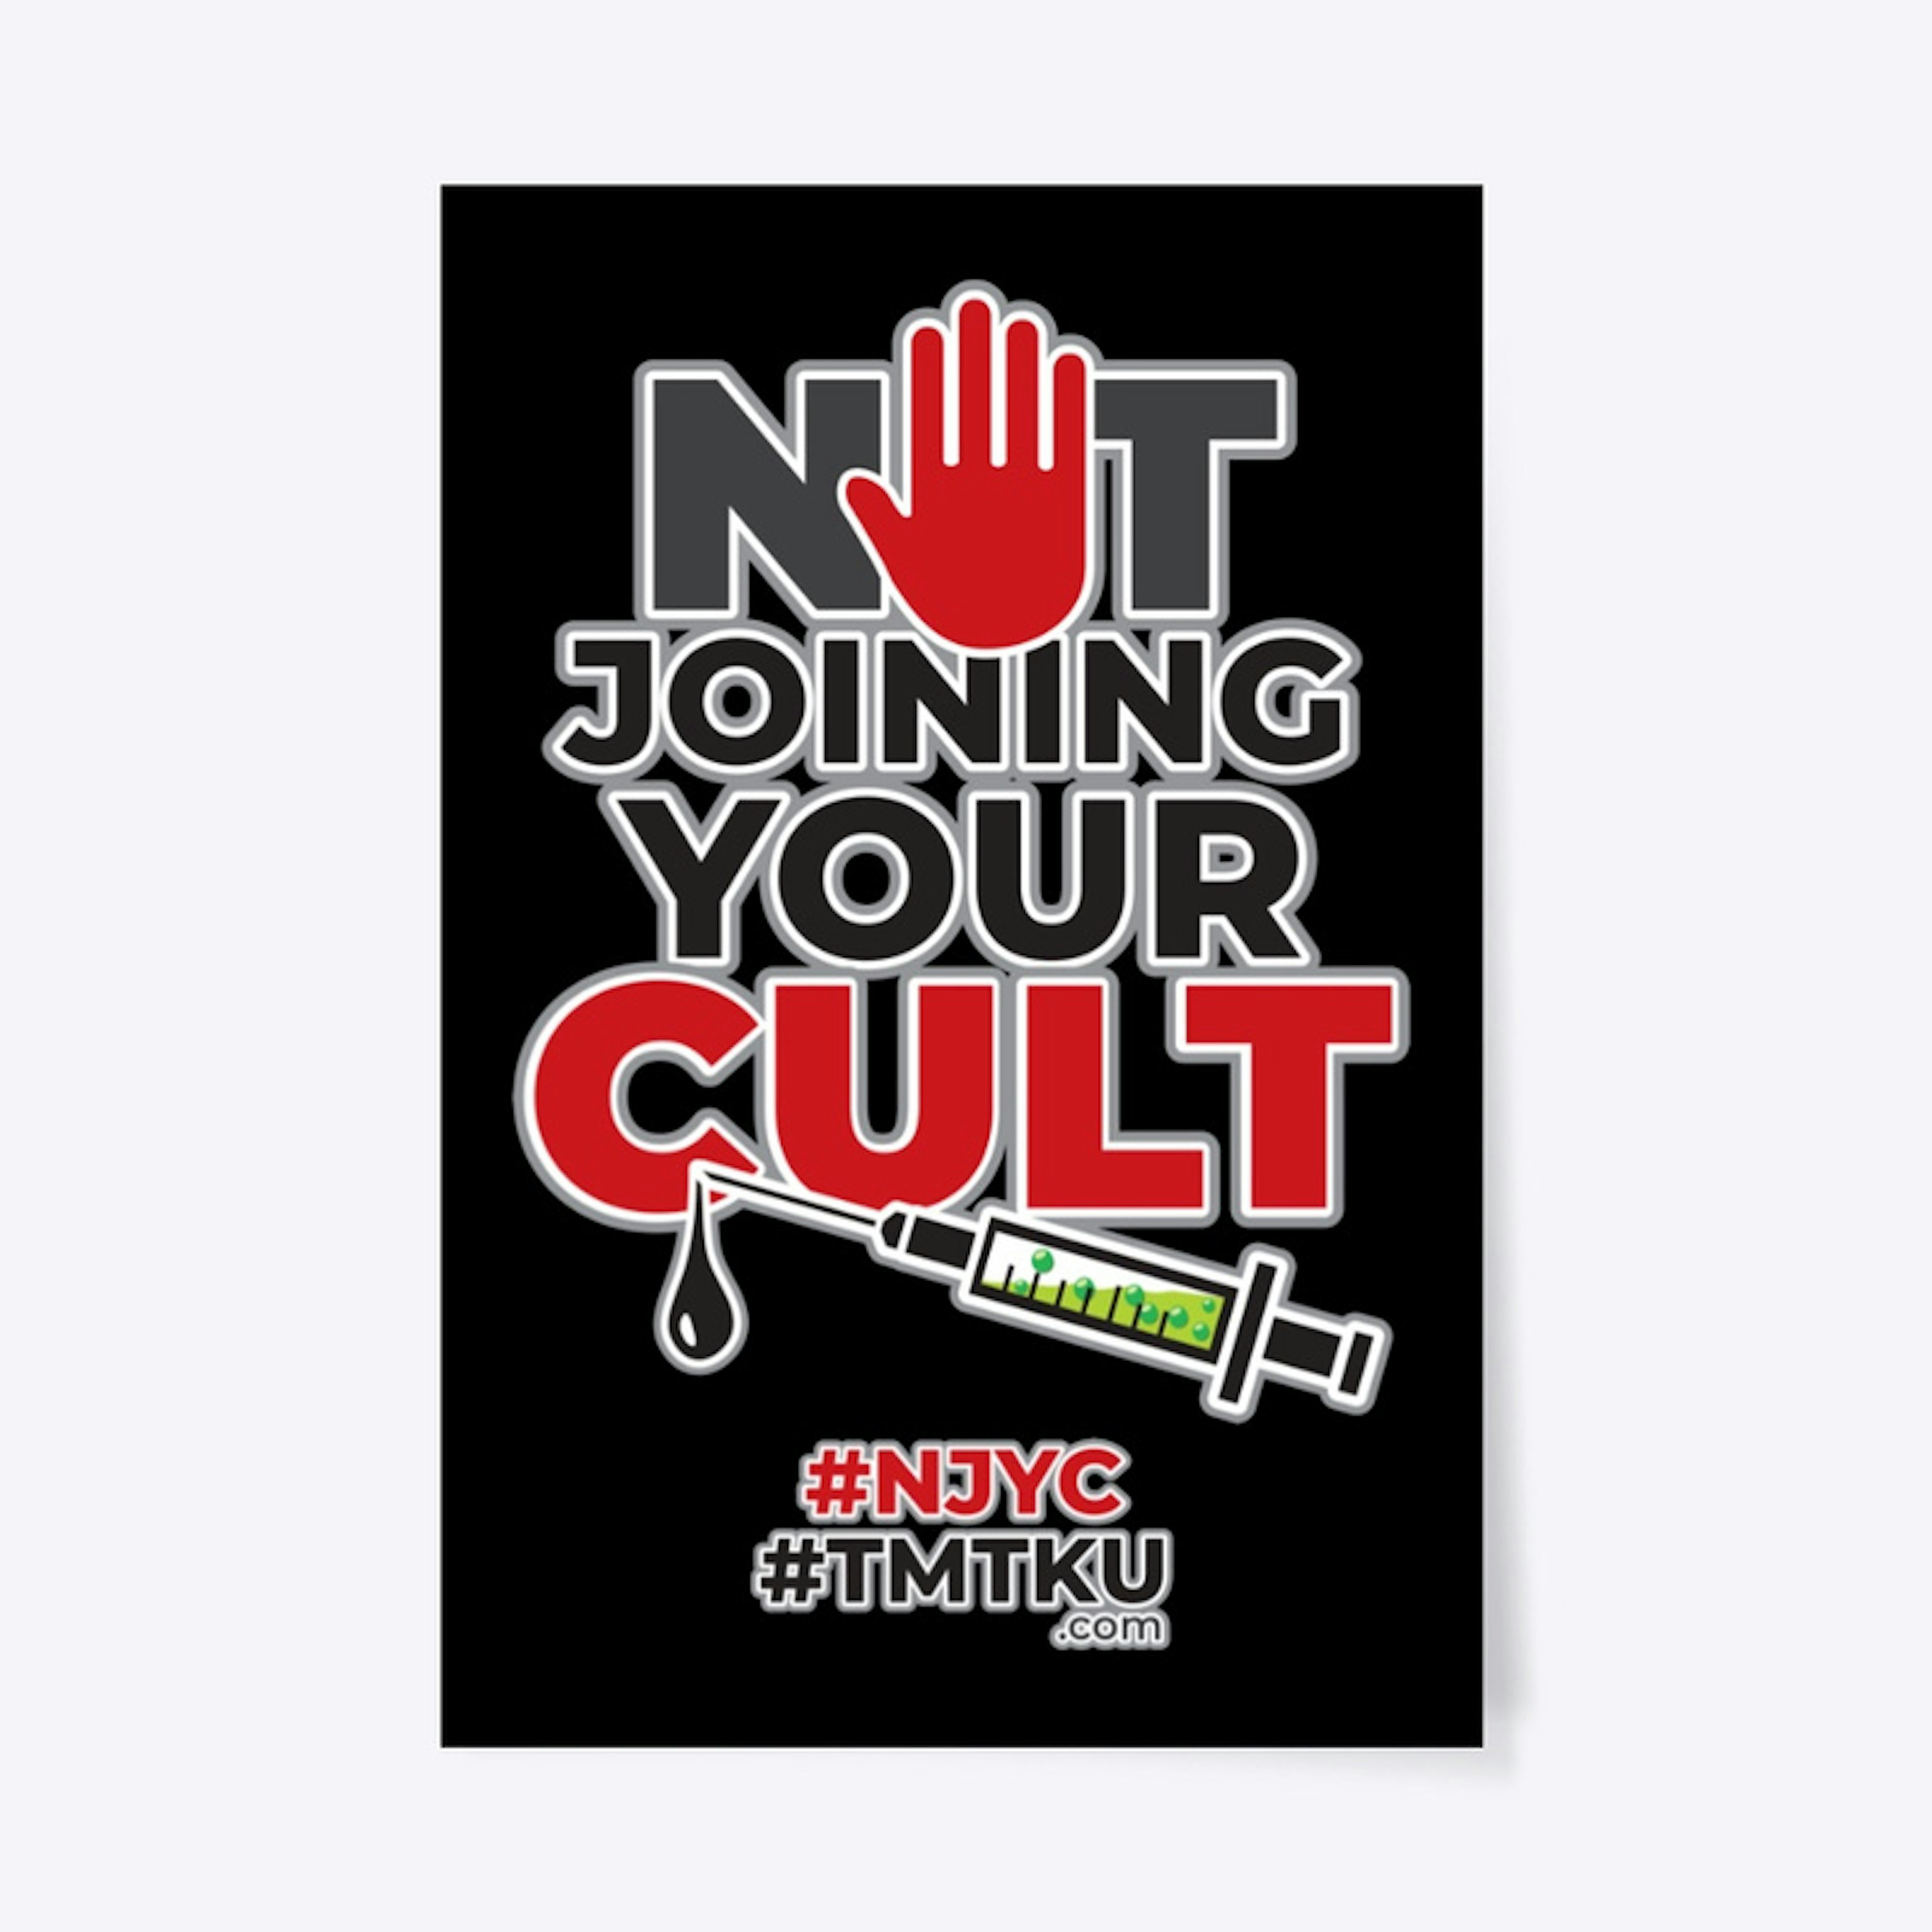 Not Joining Your CULT